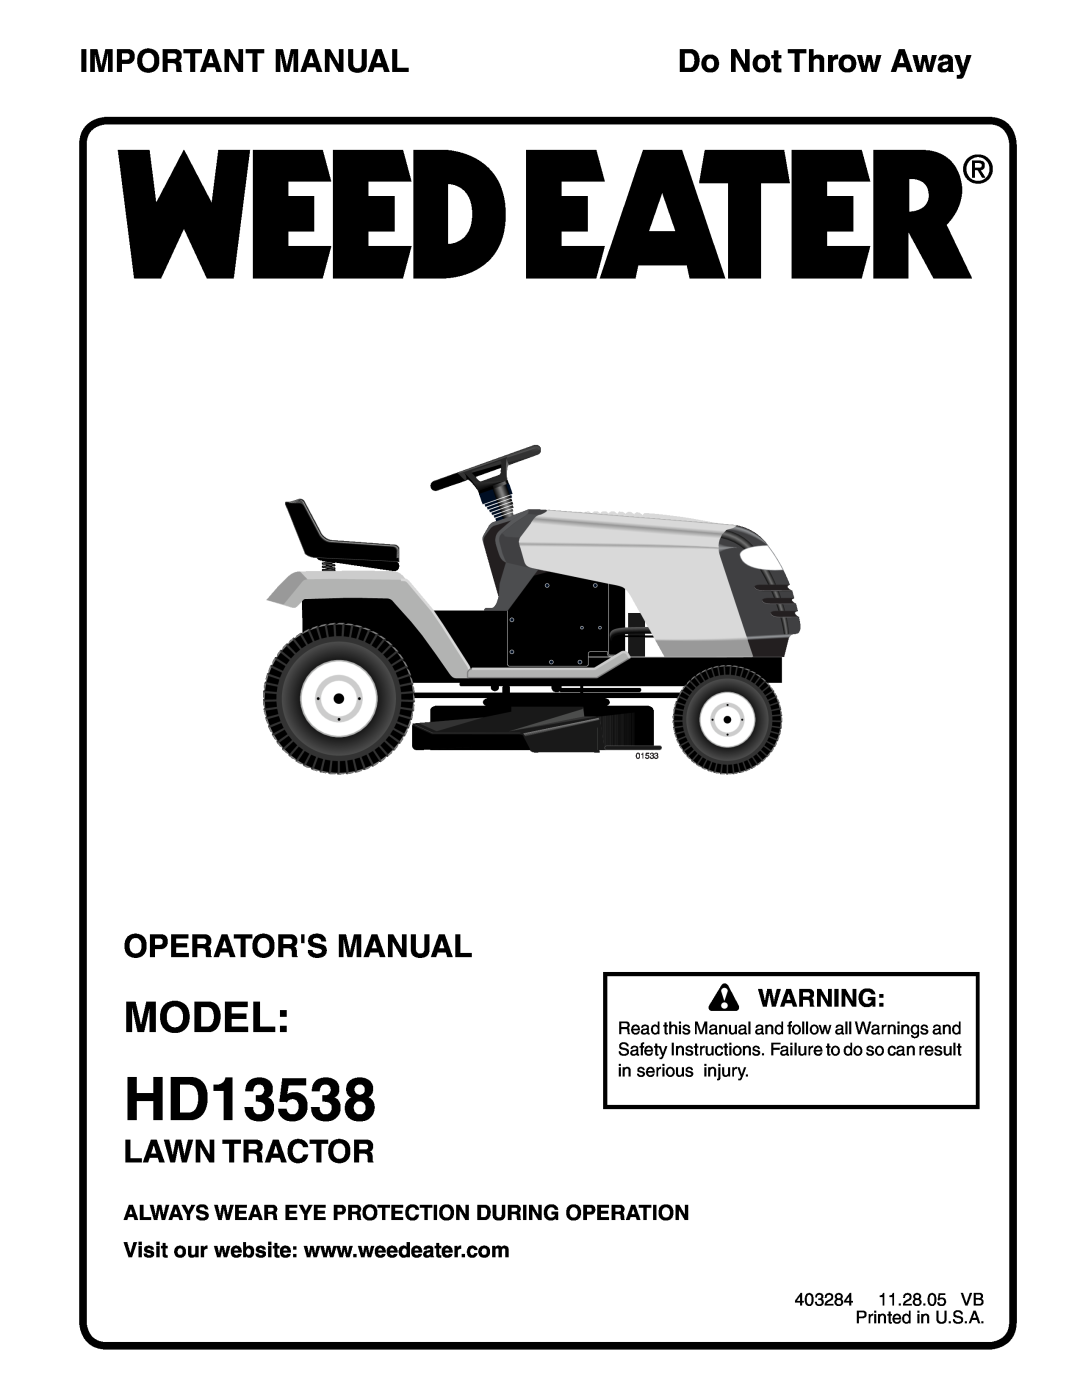 Weed Eater 96016001400 manual Model, Important Manual, Operators Manual, Lawn Tractor, HD13538, Do Not Throw Away, 01533 